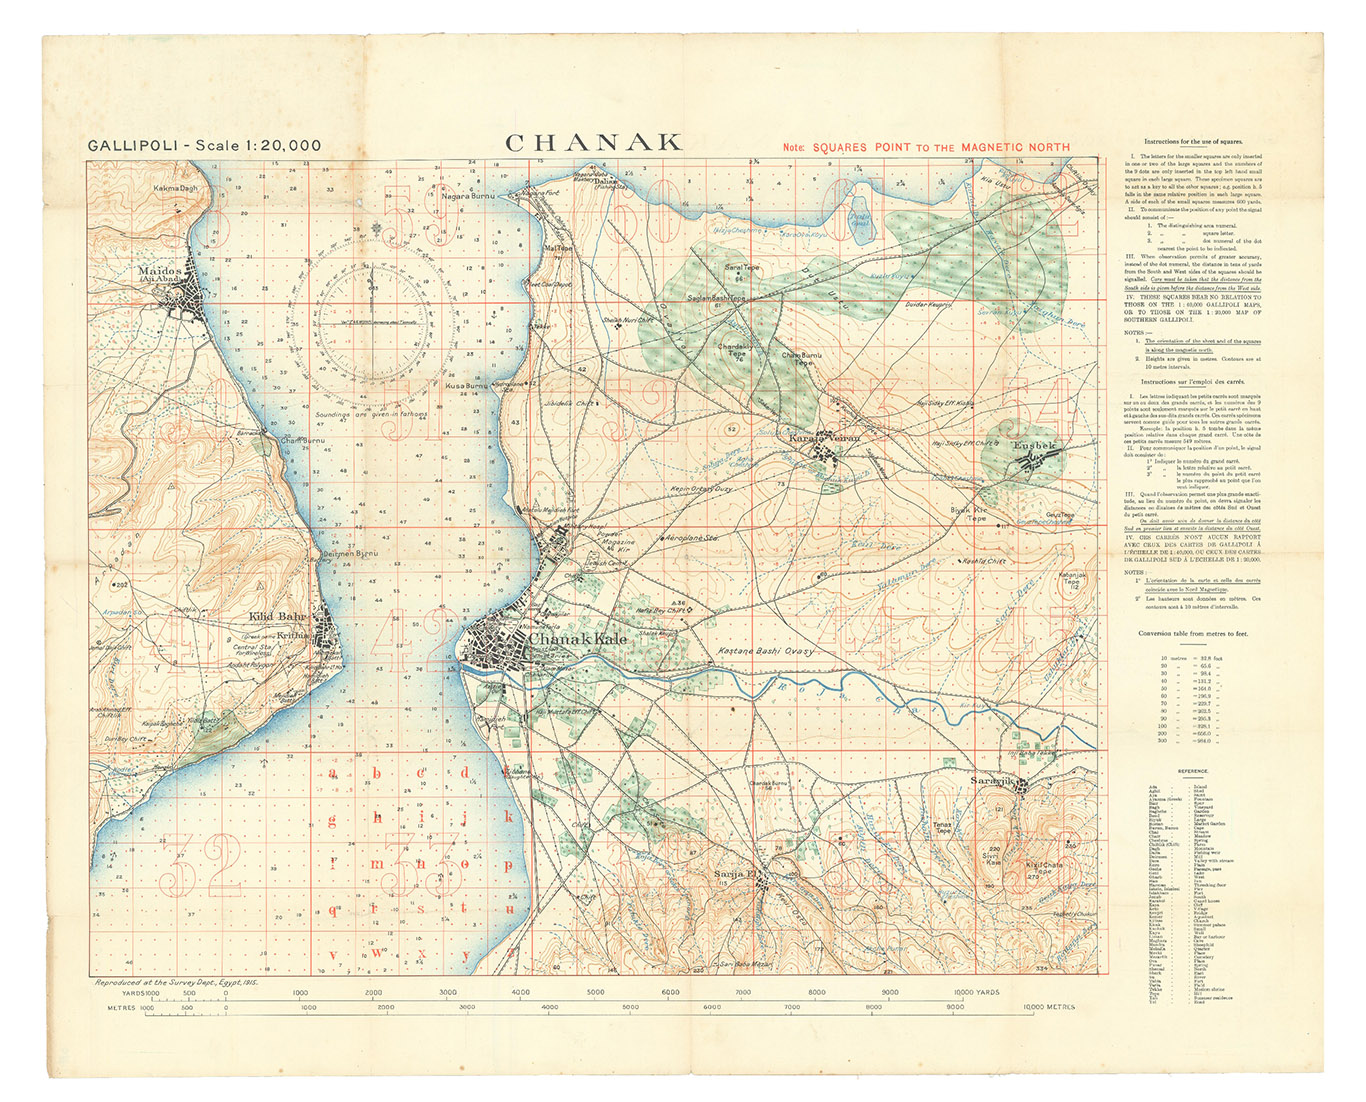 INTELLIGENCE OFFICE [ARAB BUREAU], CAIRO. - Chanak.Cairo, Survey Department Egypt, 1915 Colour-lithographed map (79 x 62.5 cm), printed in black, brown, red, blue and green. Mounted on contemporary cloth, with the key on the back (printed on or printed and pasted onto). Folded.